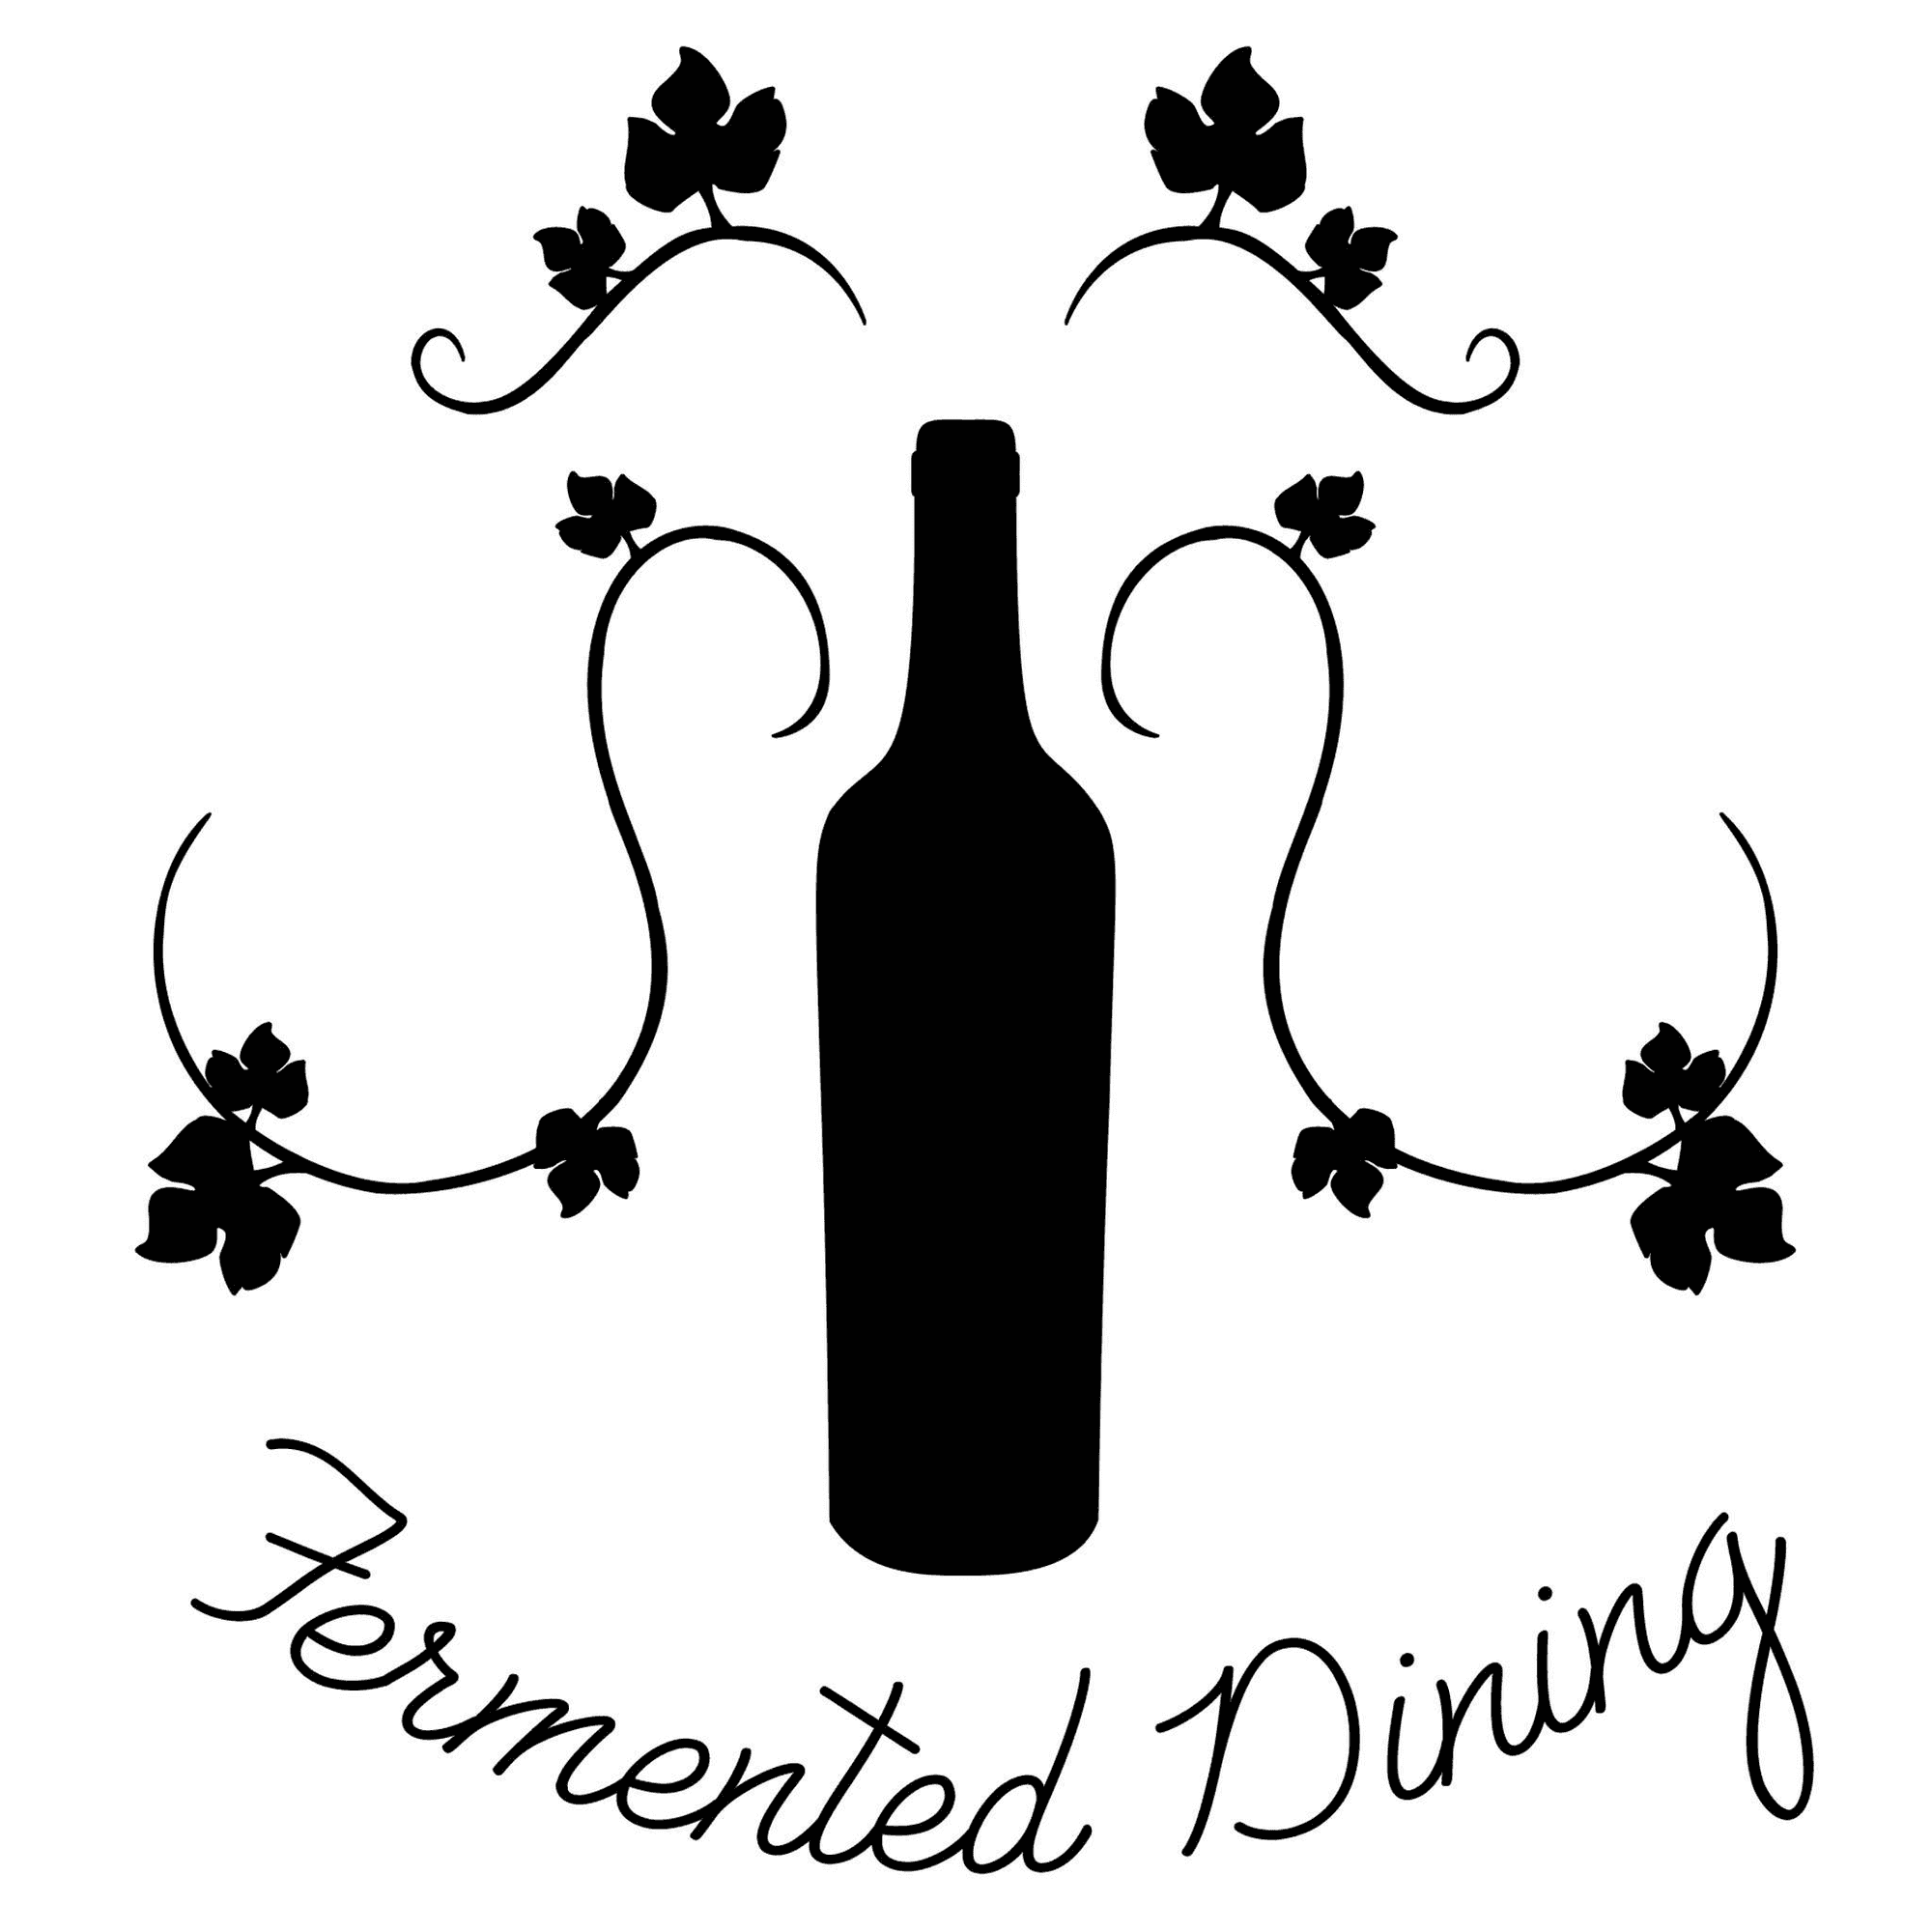 <p>Fermented Dining</p> logo